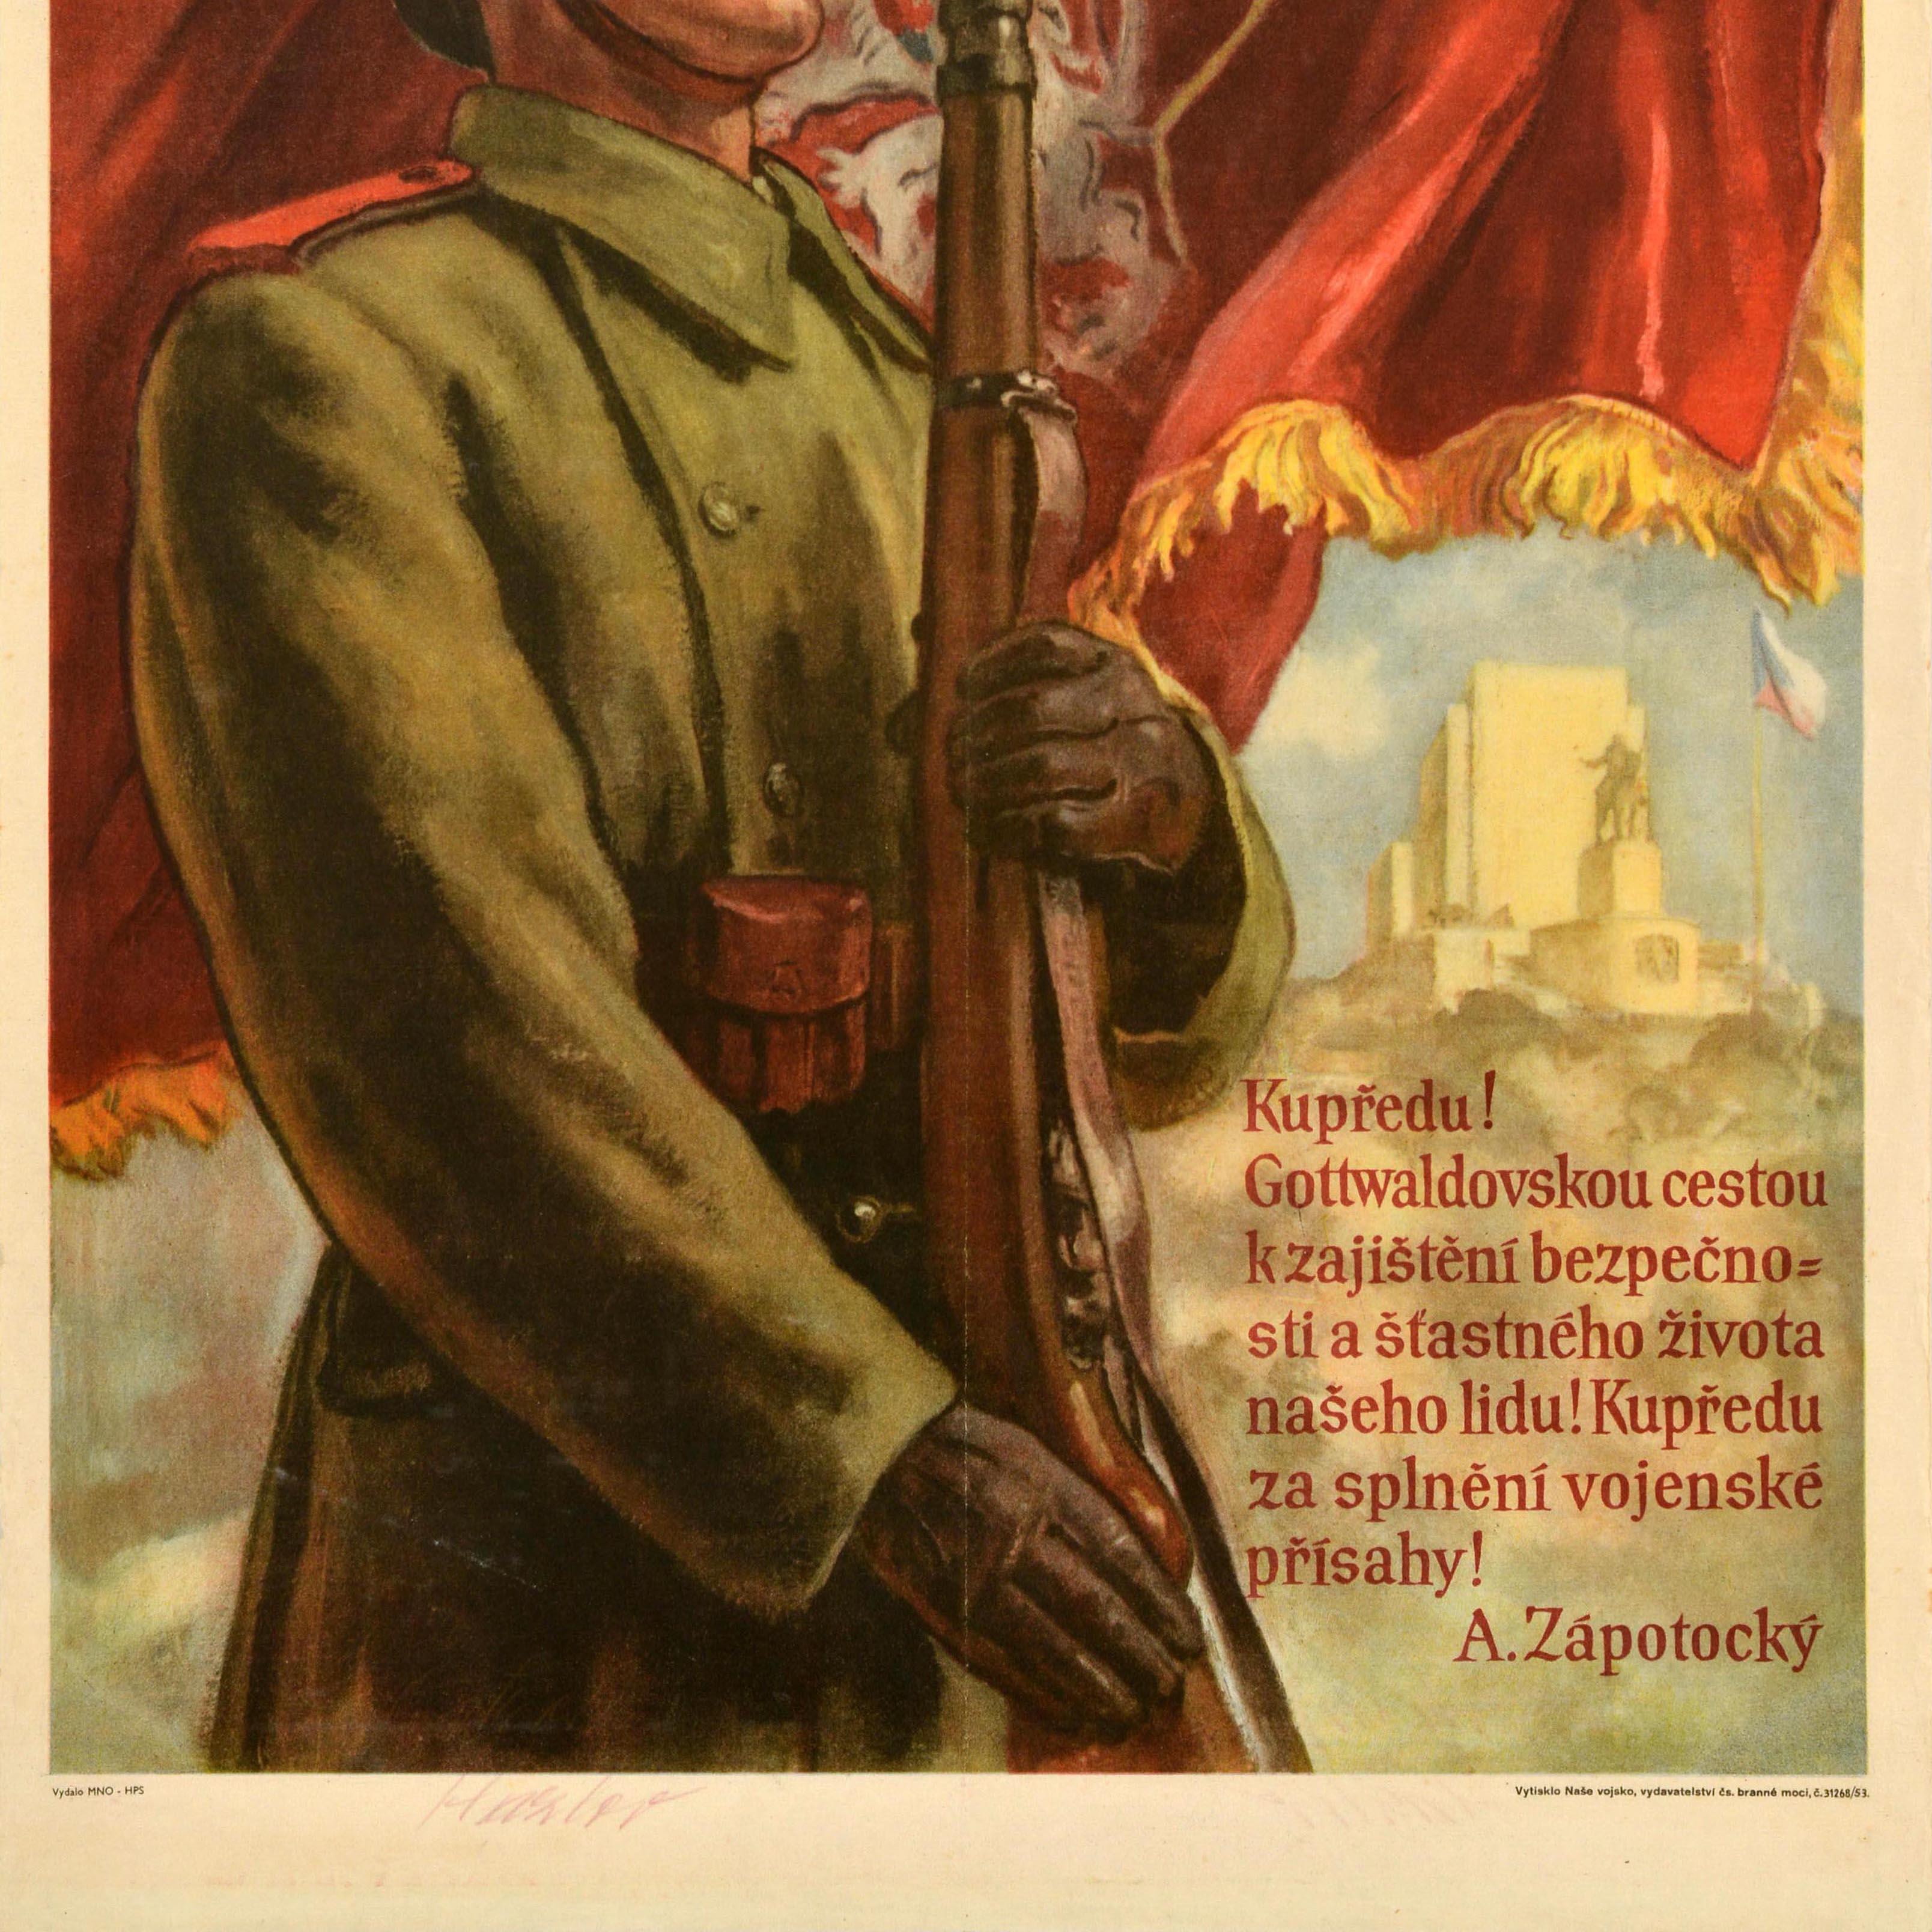 Original vintage Czechoslovak propaganda poster - Za Vlast Za Socialism! / For Motherland For Socialism - featuring dynamic artwork of a soldier in uniform and armed with a rifle gun standing guard in front of the gold title text and silver Bohemian